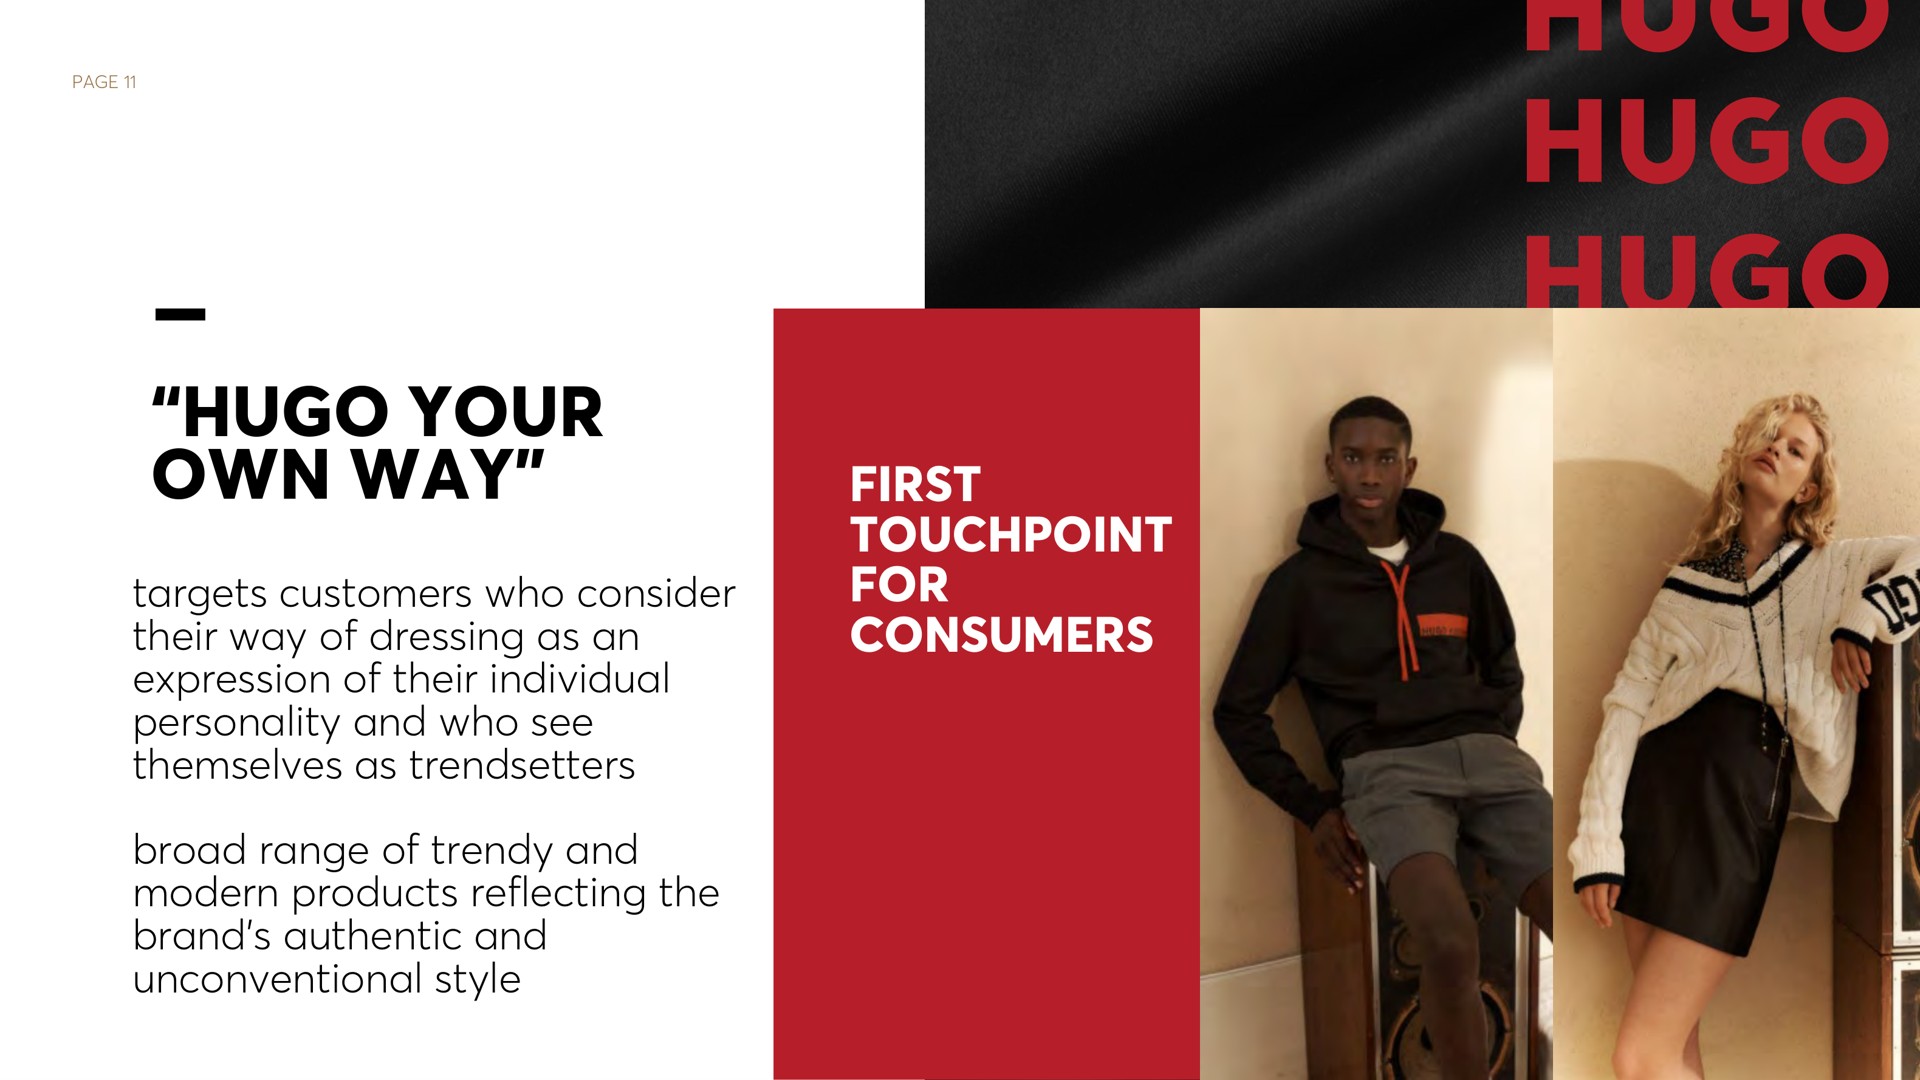 page i first for consumers your own way targets customers who consider their way of dressing as an expression of their individual personality and who see themselves as broad range of and modern products reflecting the brand authentic and unconventional style | Hugo Boss